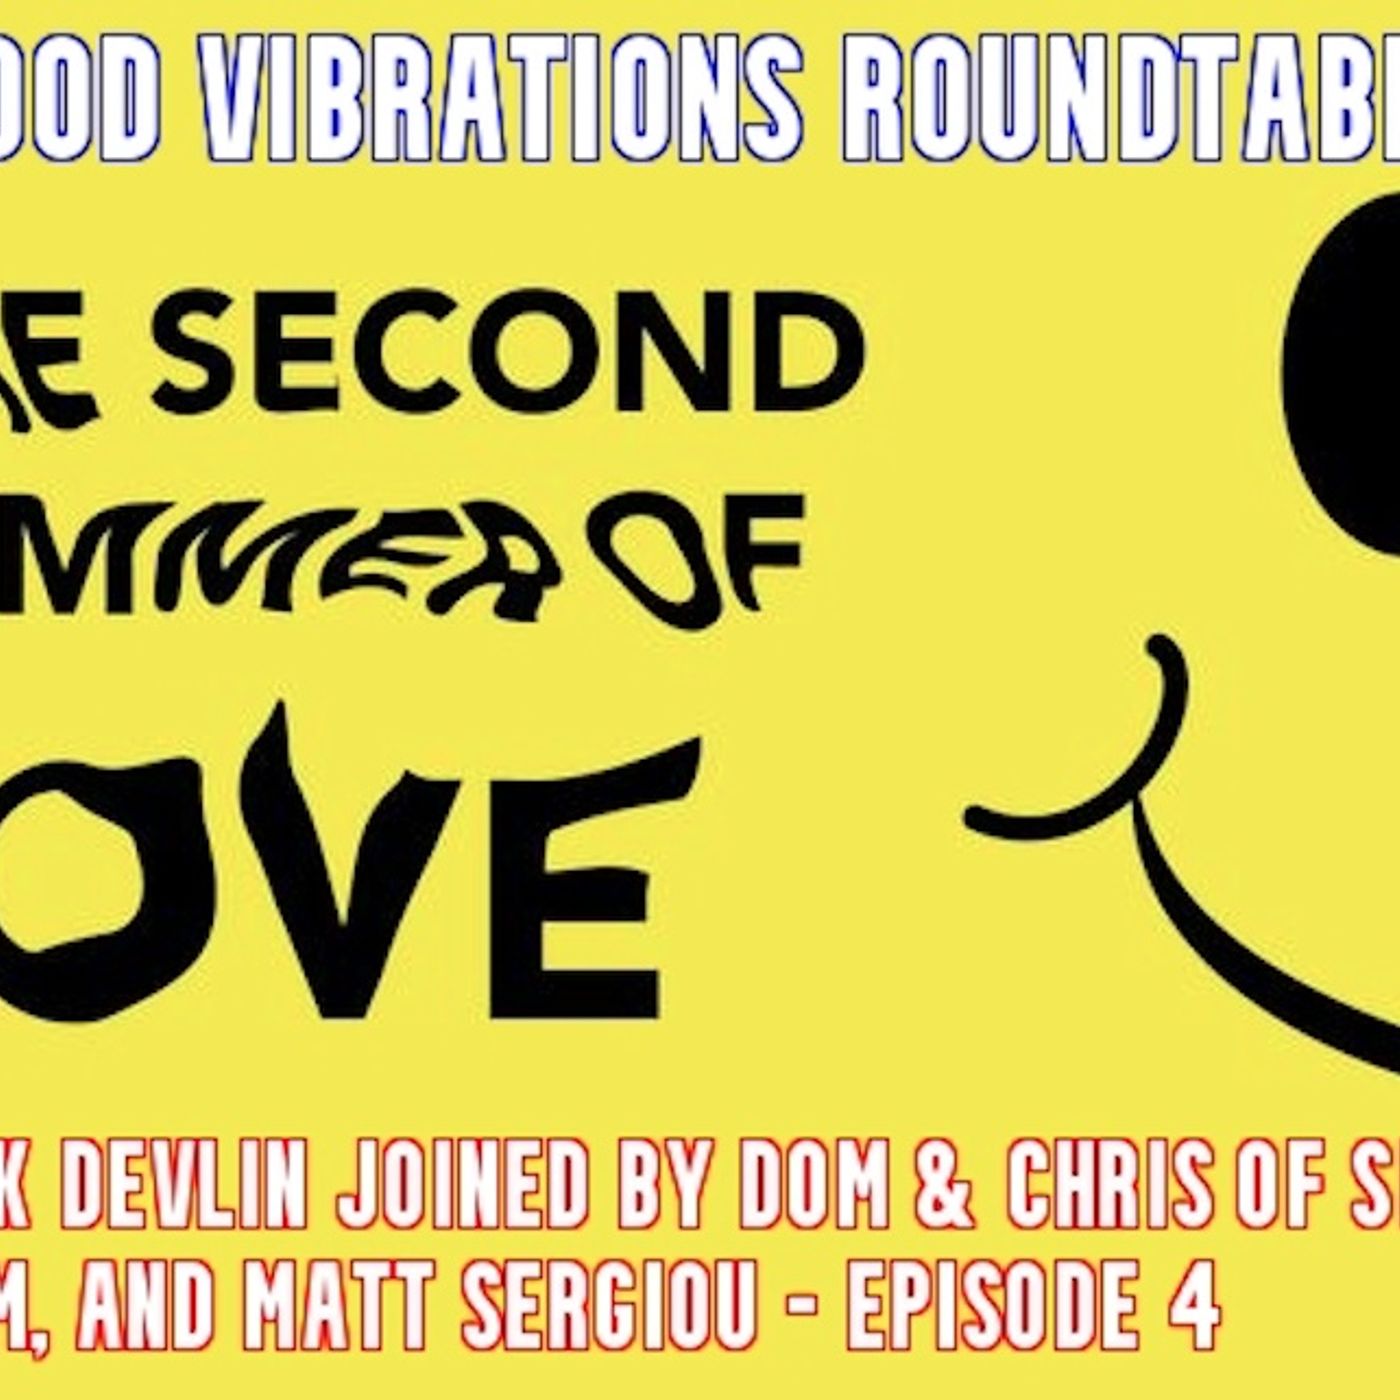 Good Vibrations Podcast: Second Summer of Love Roundtable - Episode 4